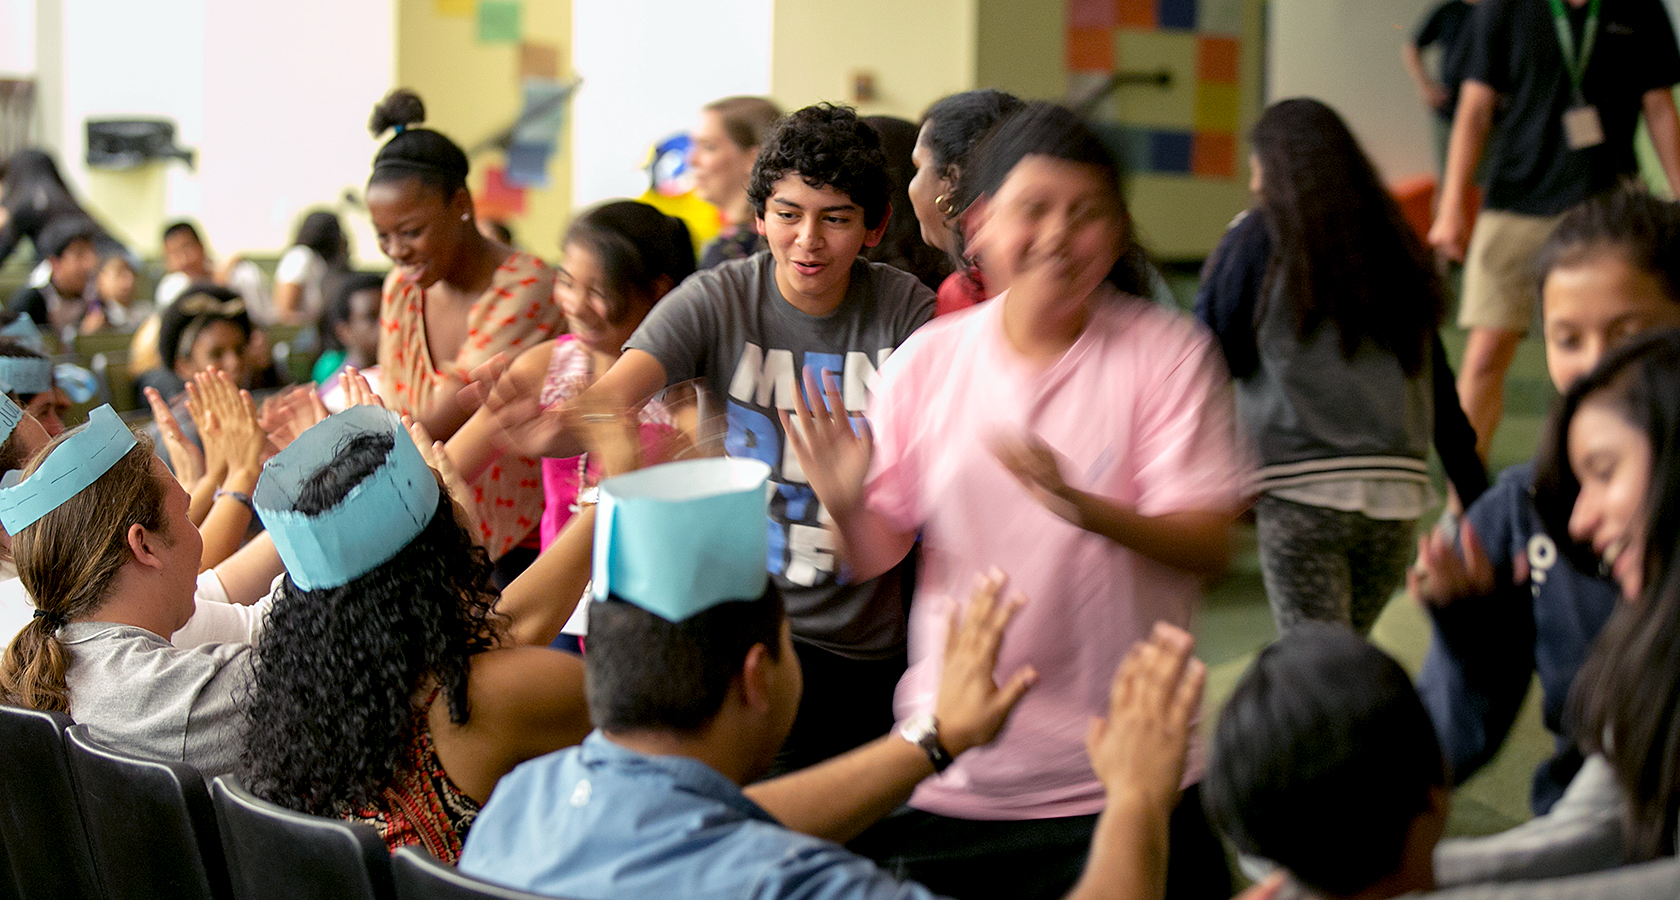 Breakthrough Austin students start their day by giving each other high fives. 